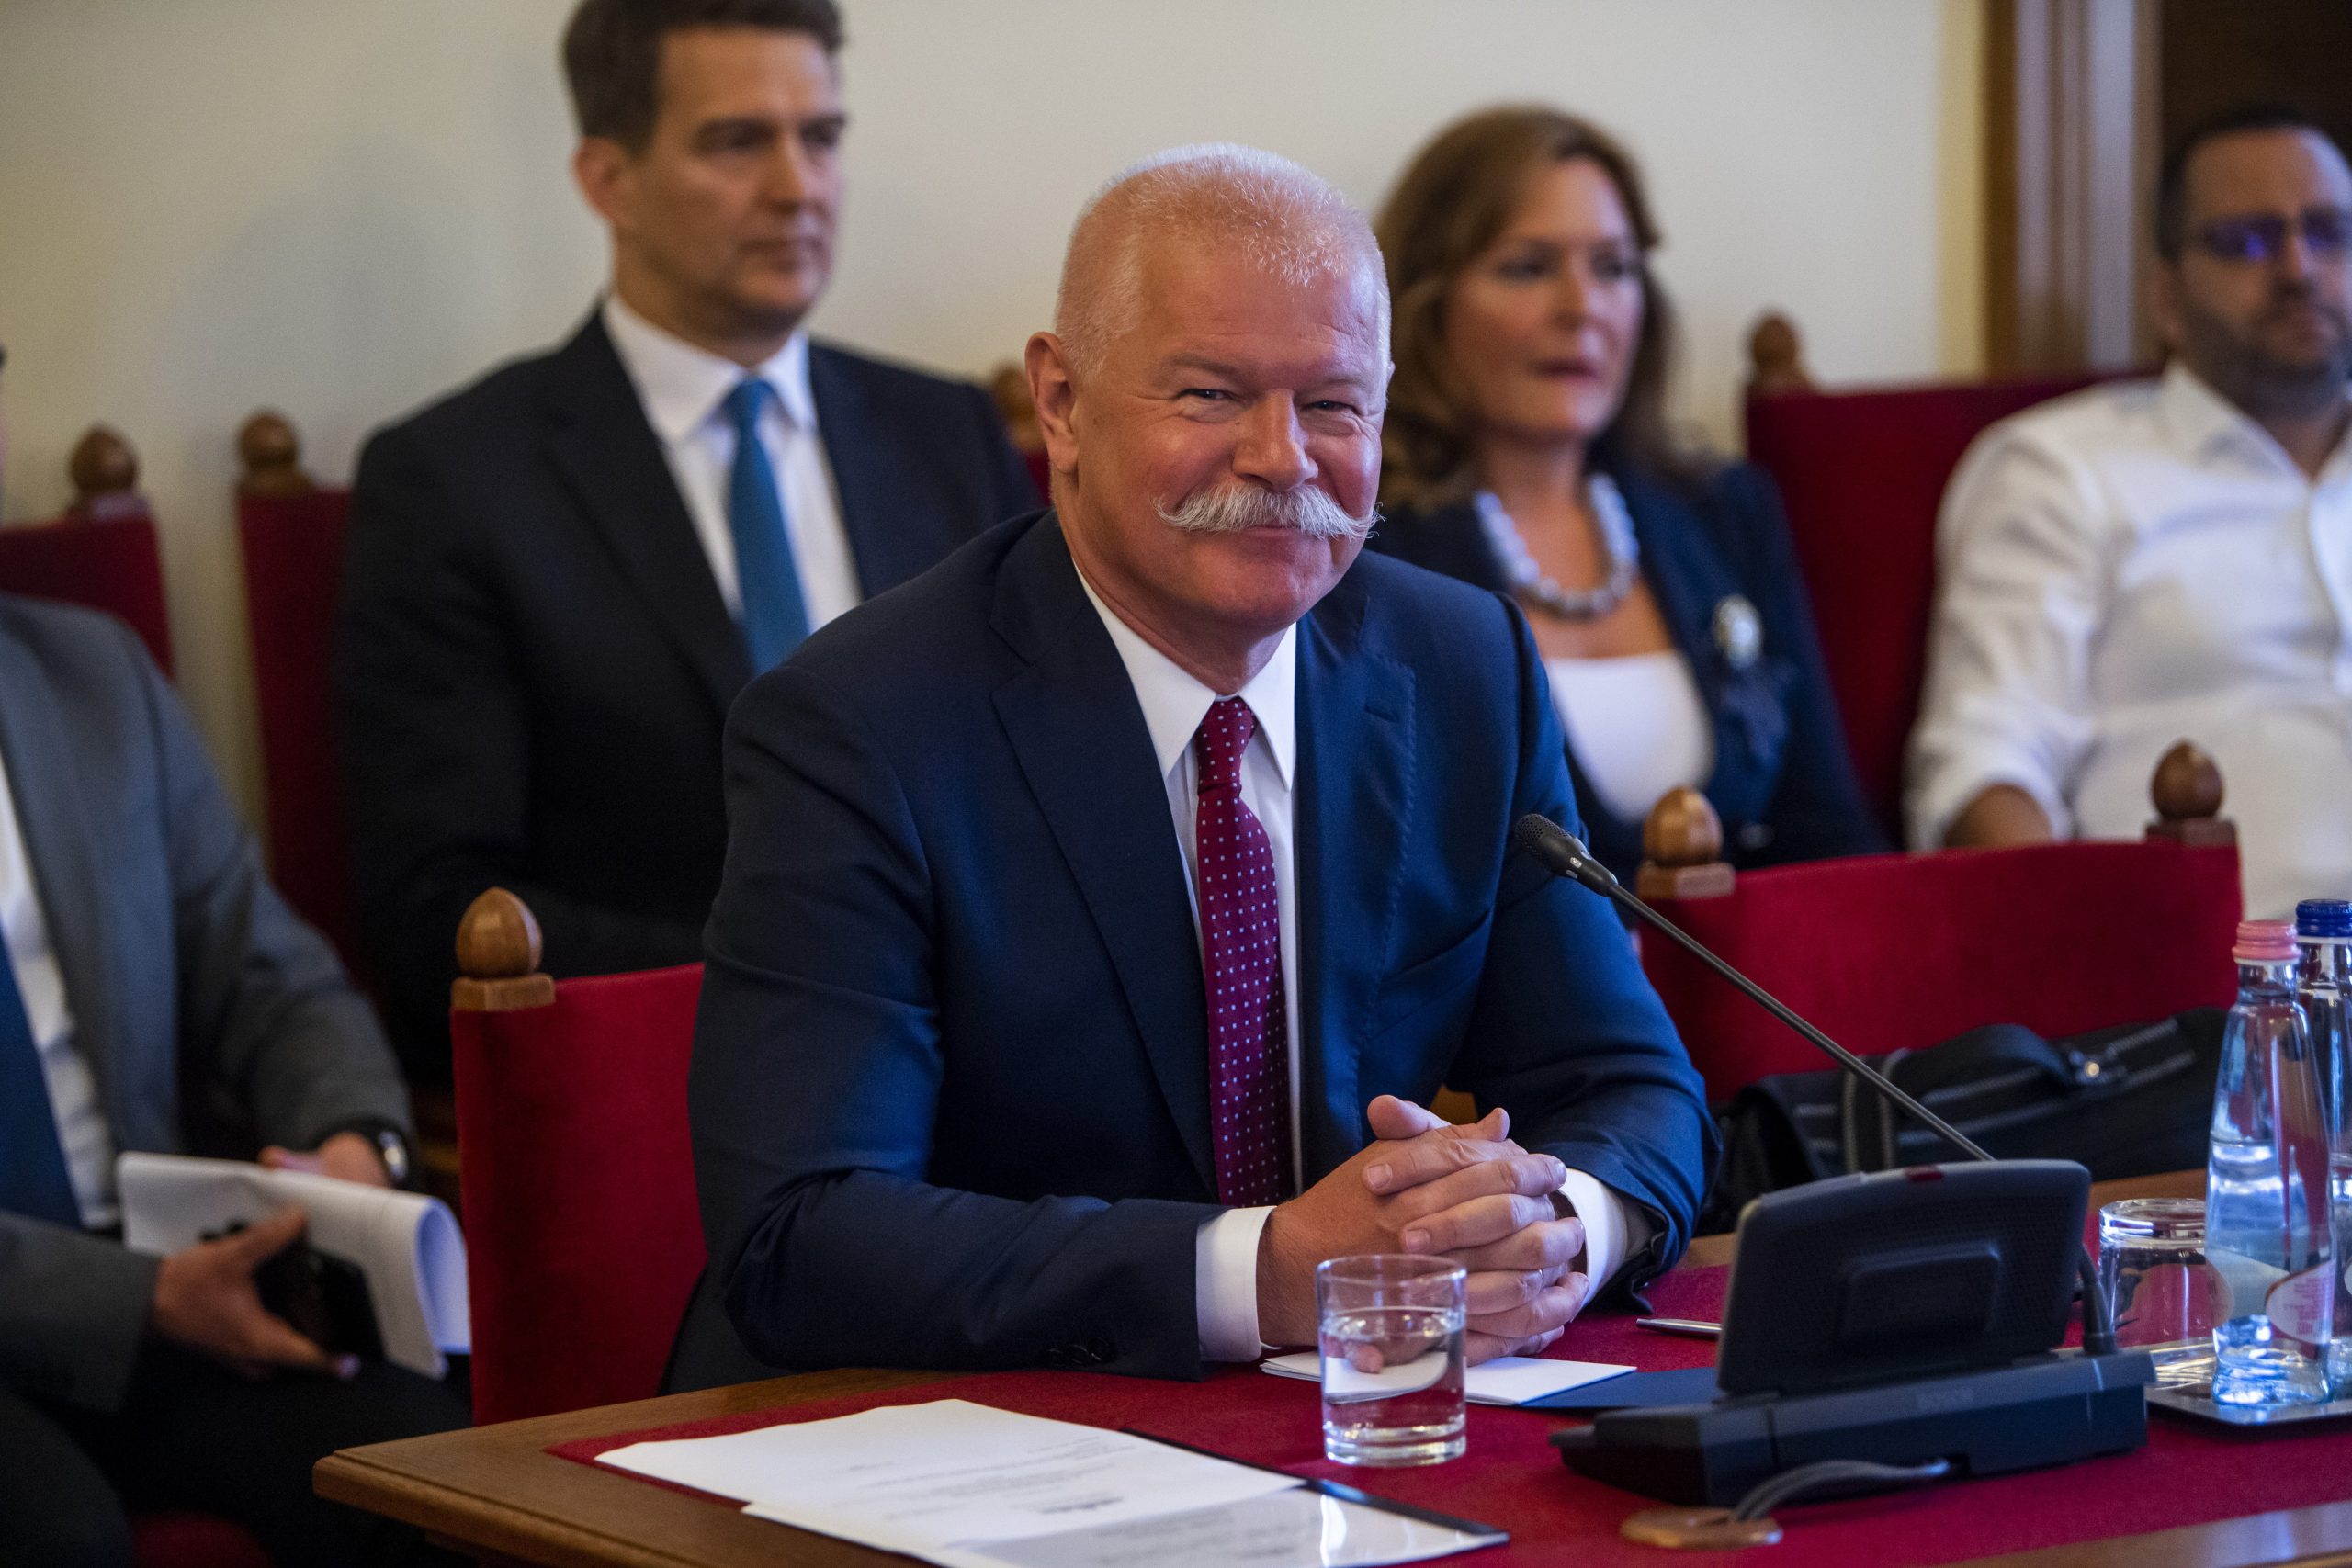 Minister candidate Csák calls new Ministry of Culture and Innovation 